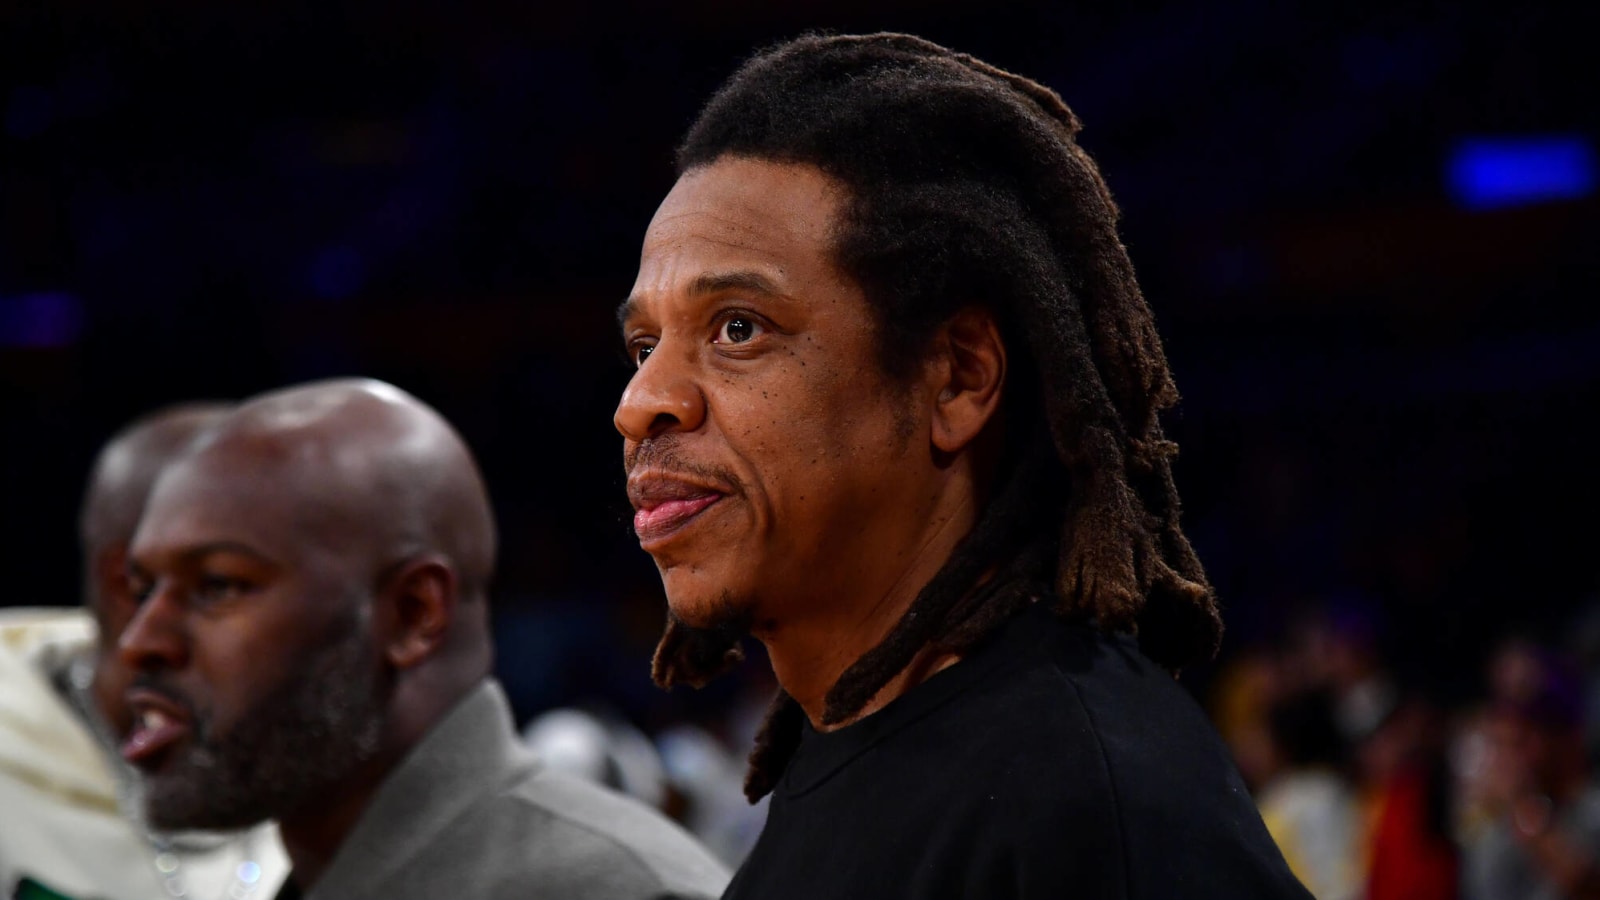 Jay-Z tried to calm down an upset Denzel Washington during